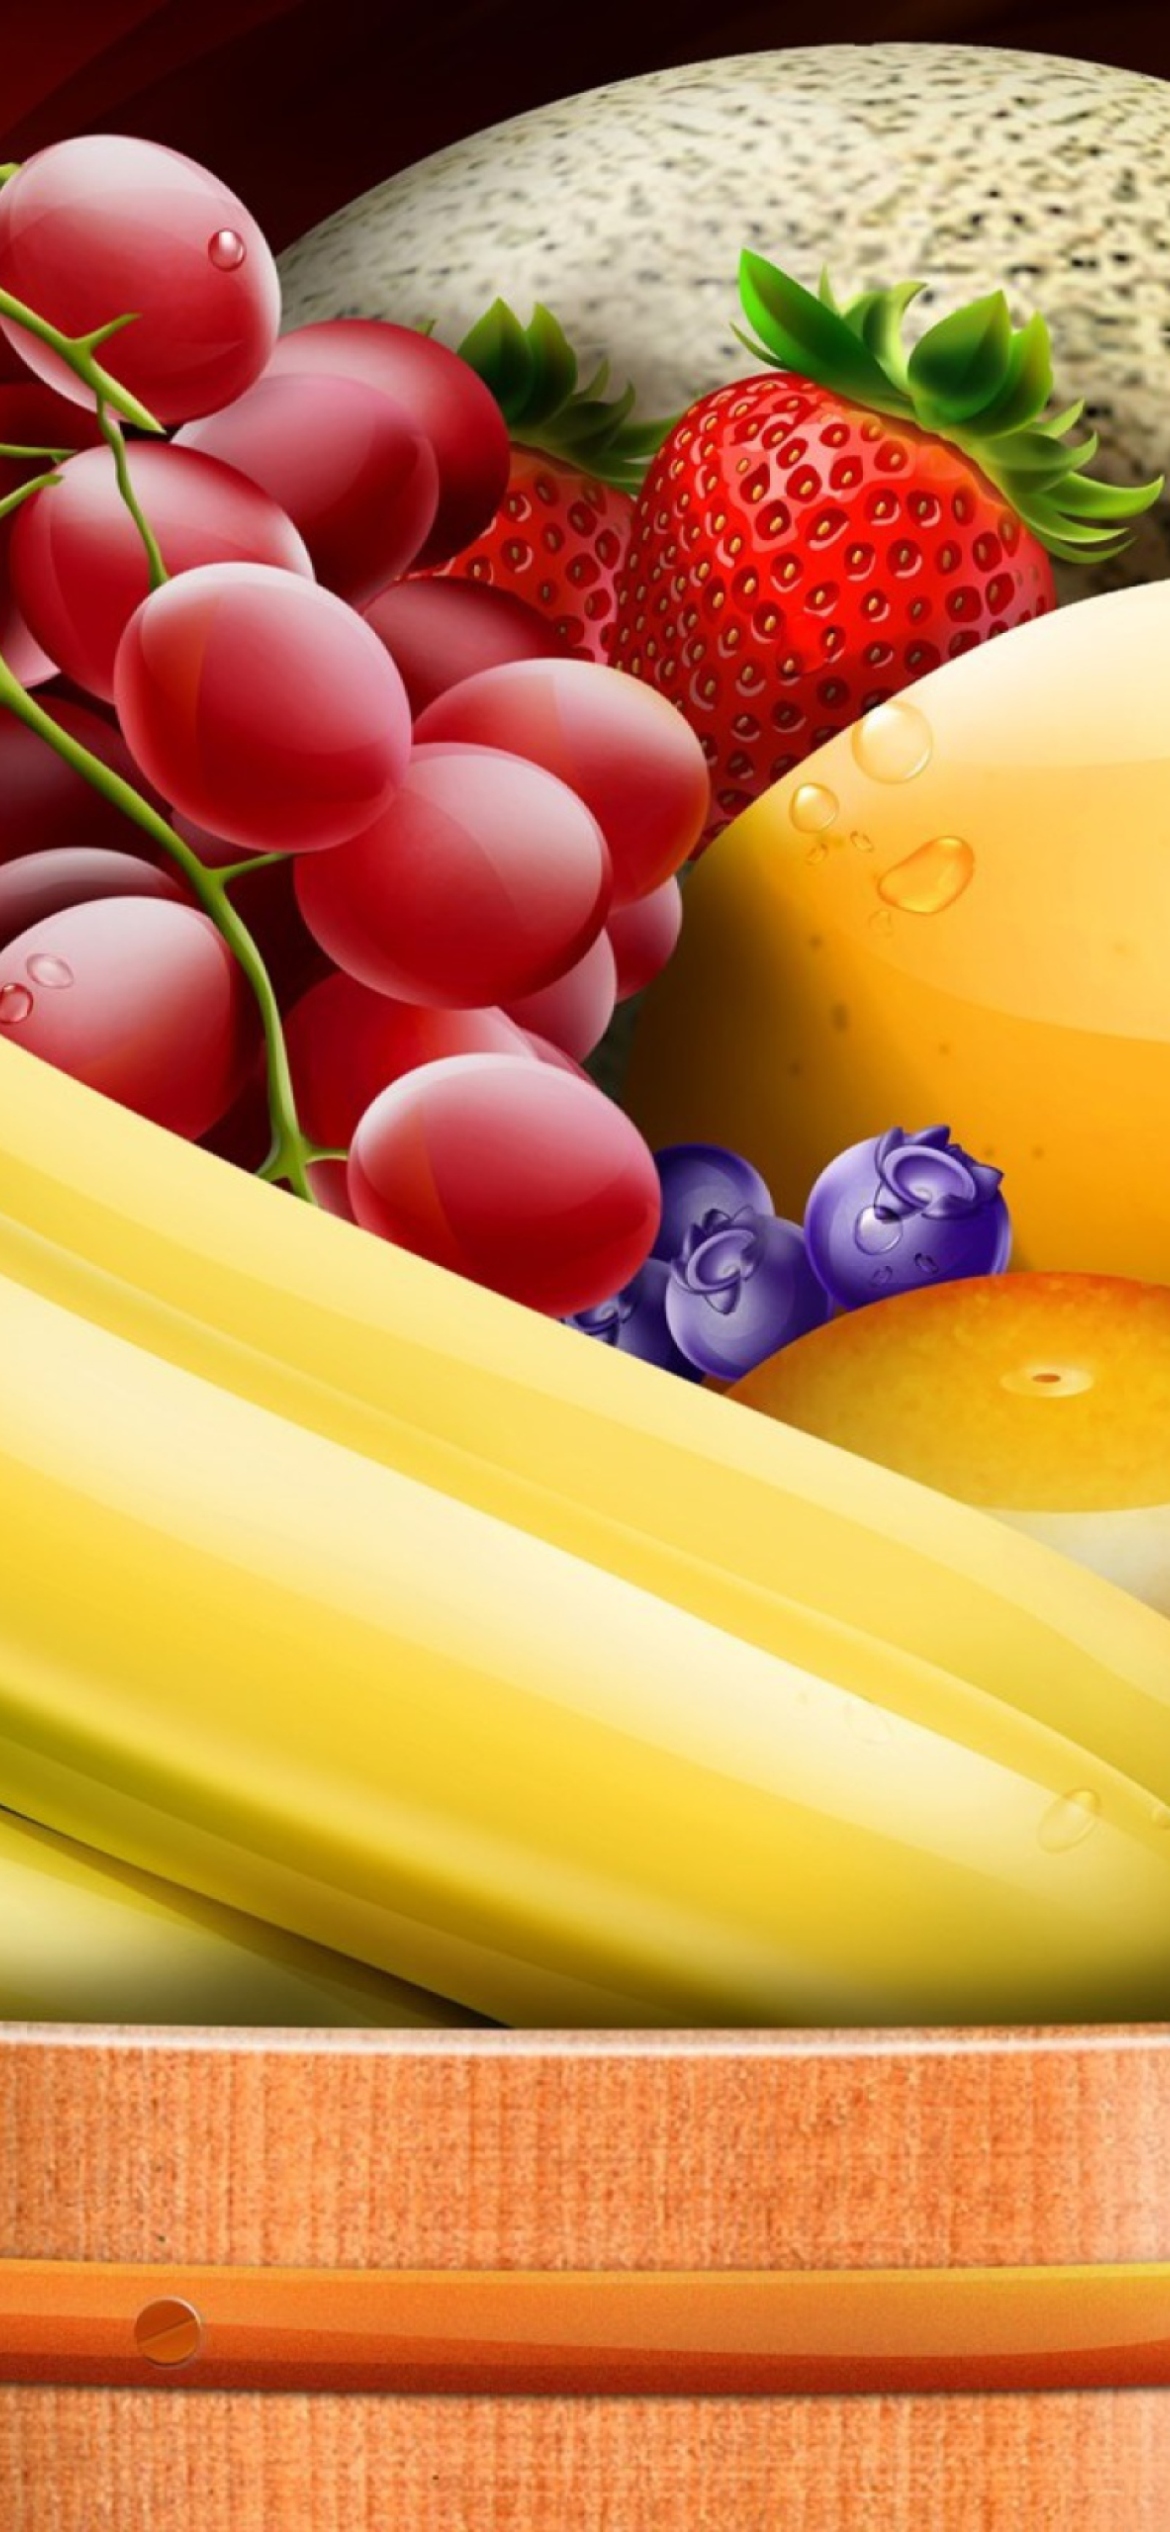 Fruits And Berries wallpaper 1170x2532